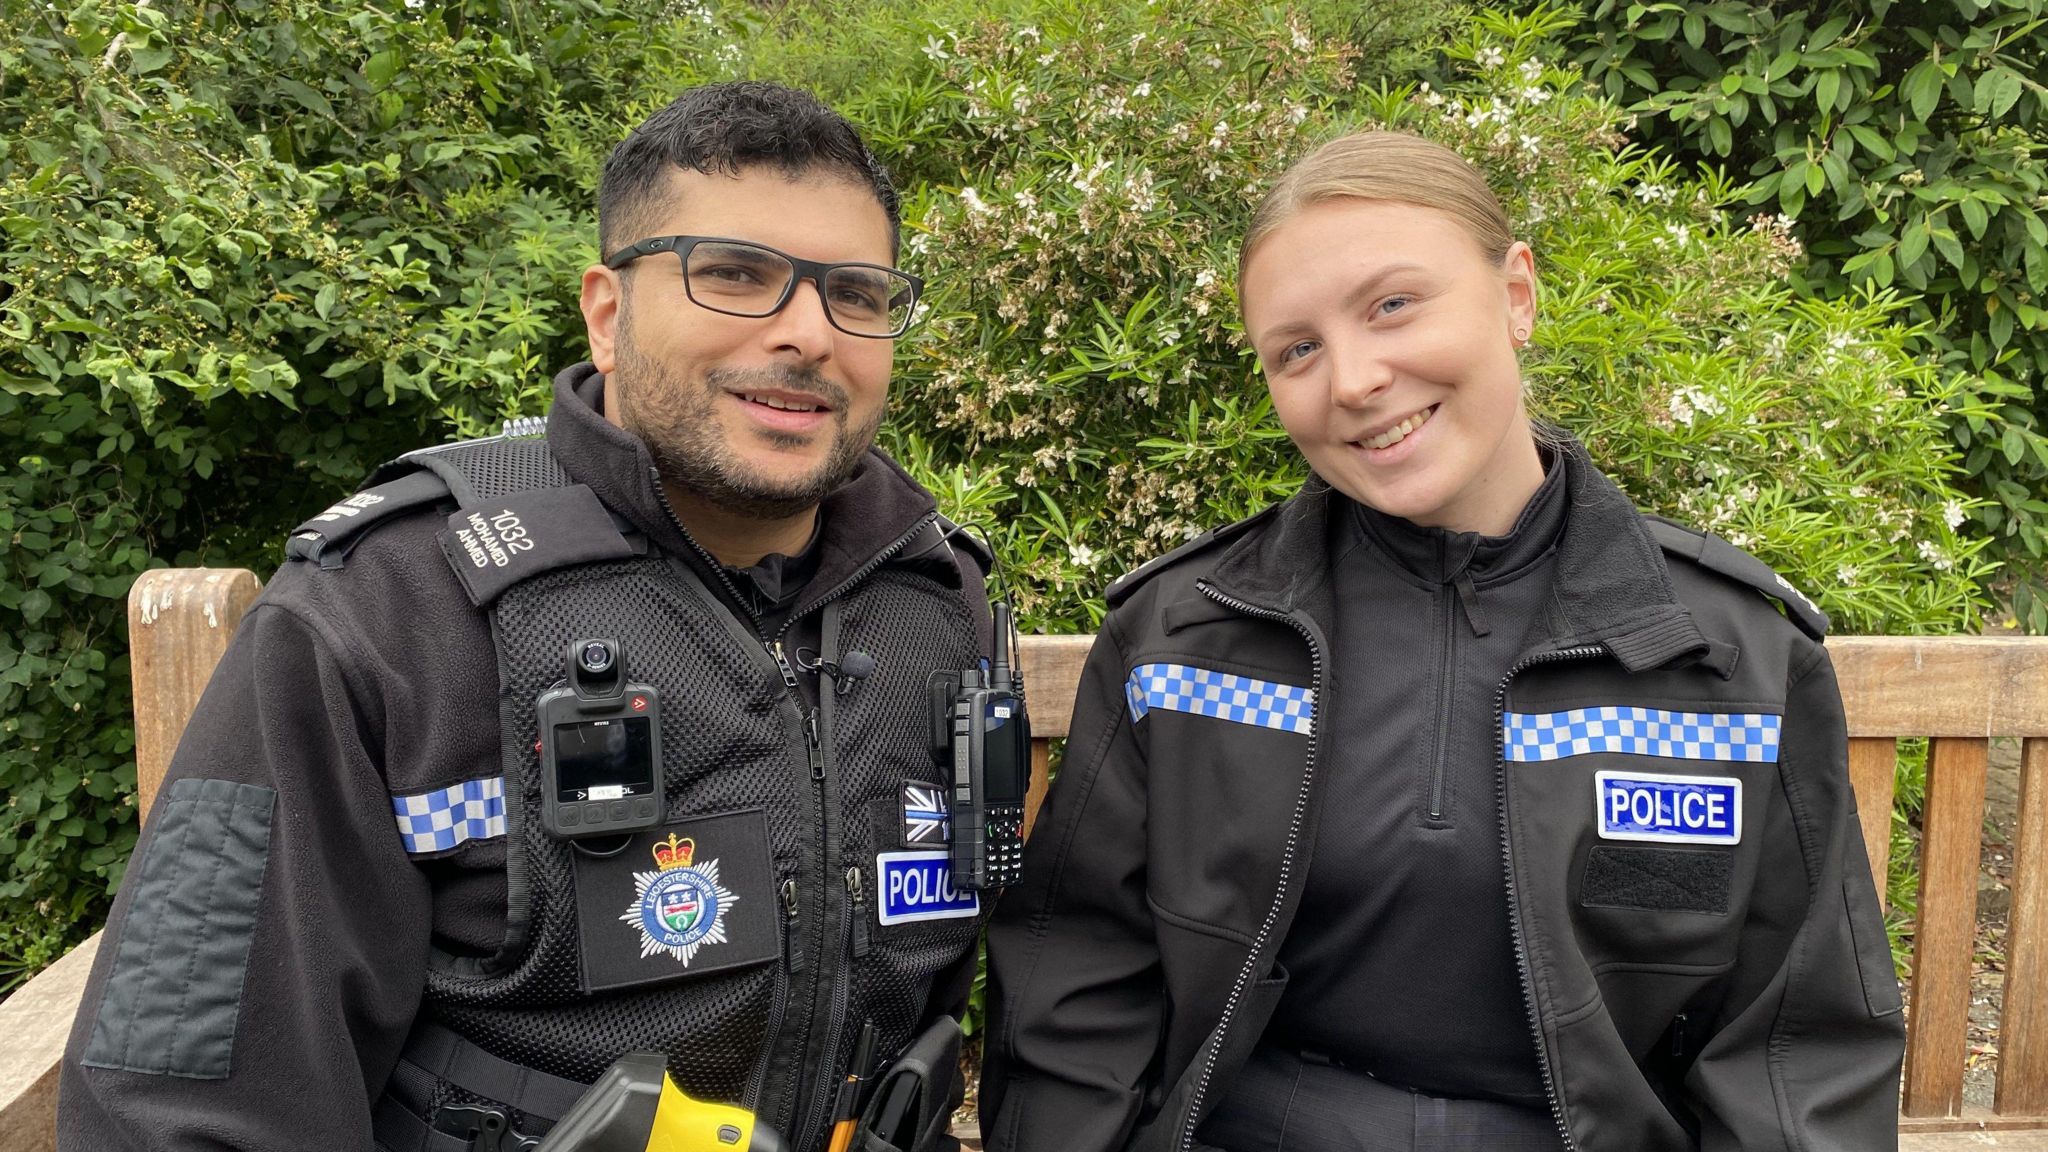 PC Mohammed Ahmed and PC Niamh Harriman